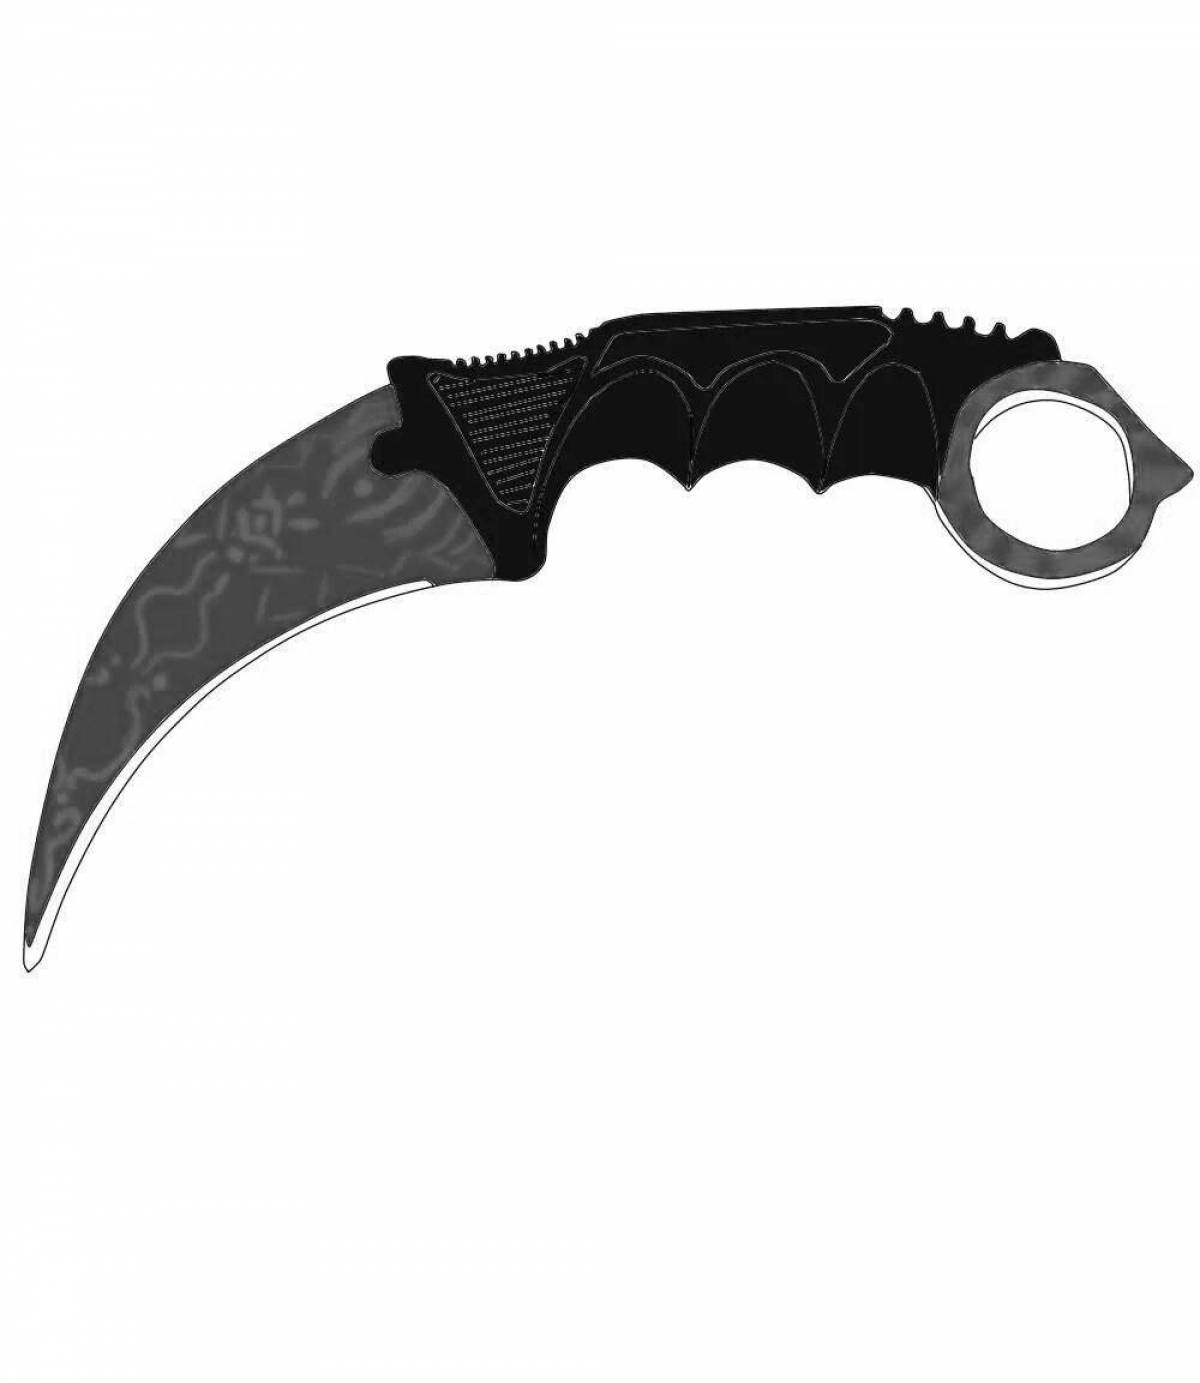 Exciting coloring of the karambit knife from standoff 2